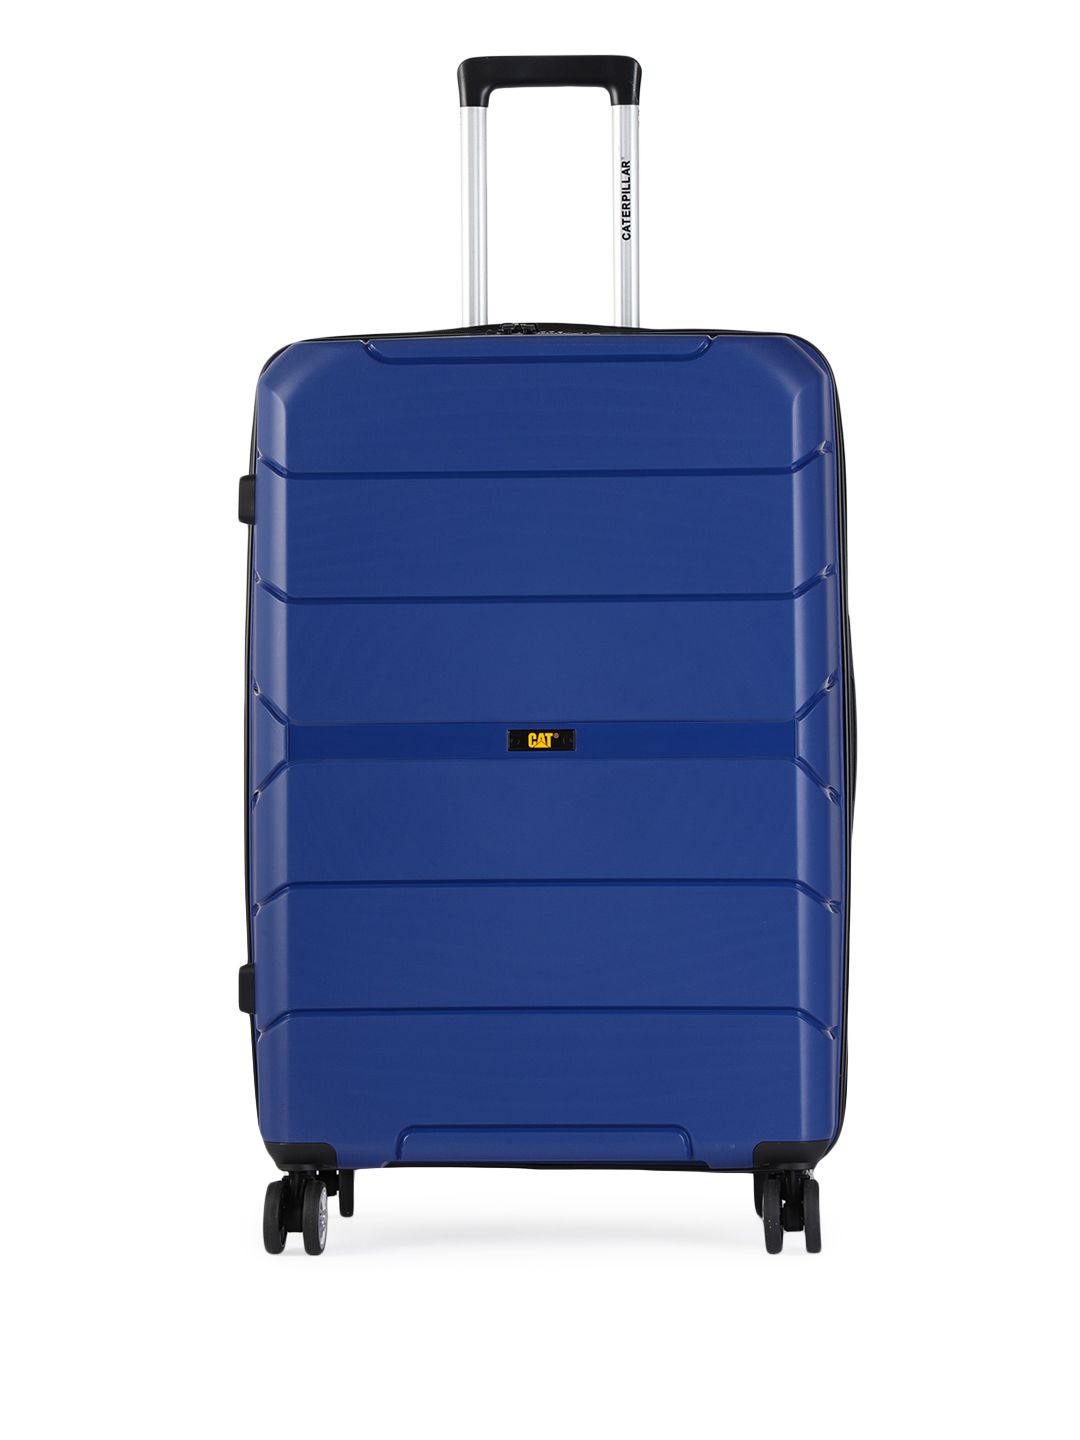 CAT ARMOR Navy Blue Solid Hard Side Large Trolley Suitcase Price in India